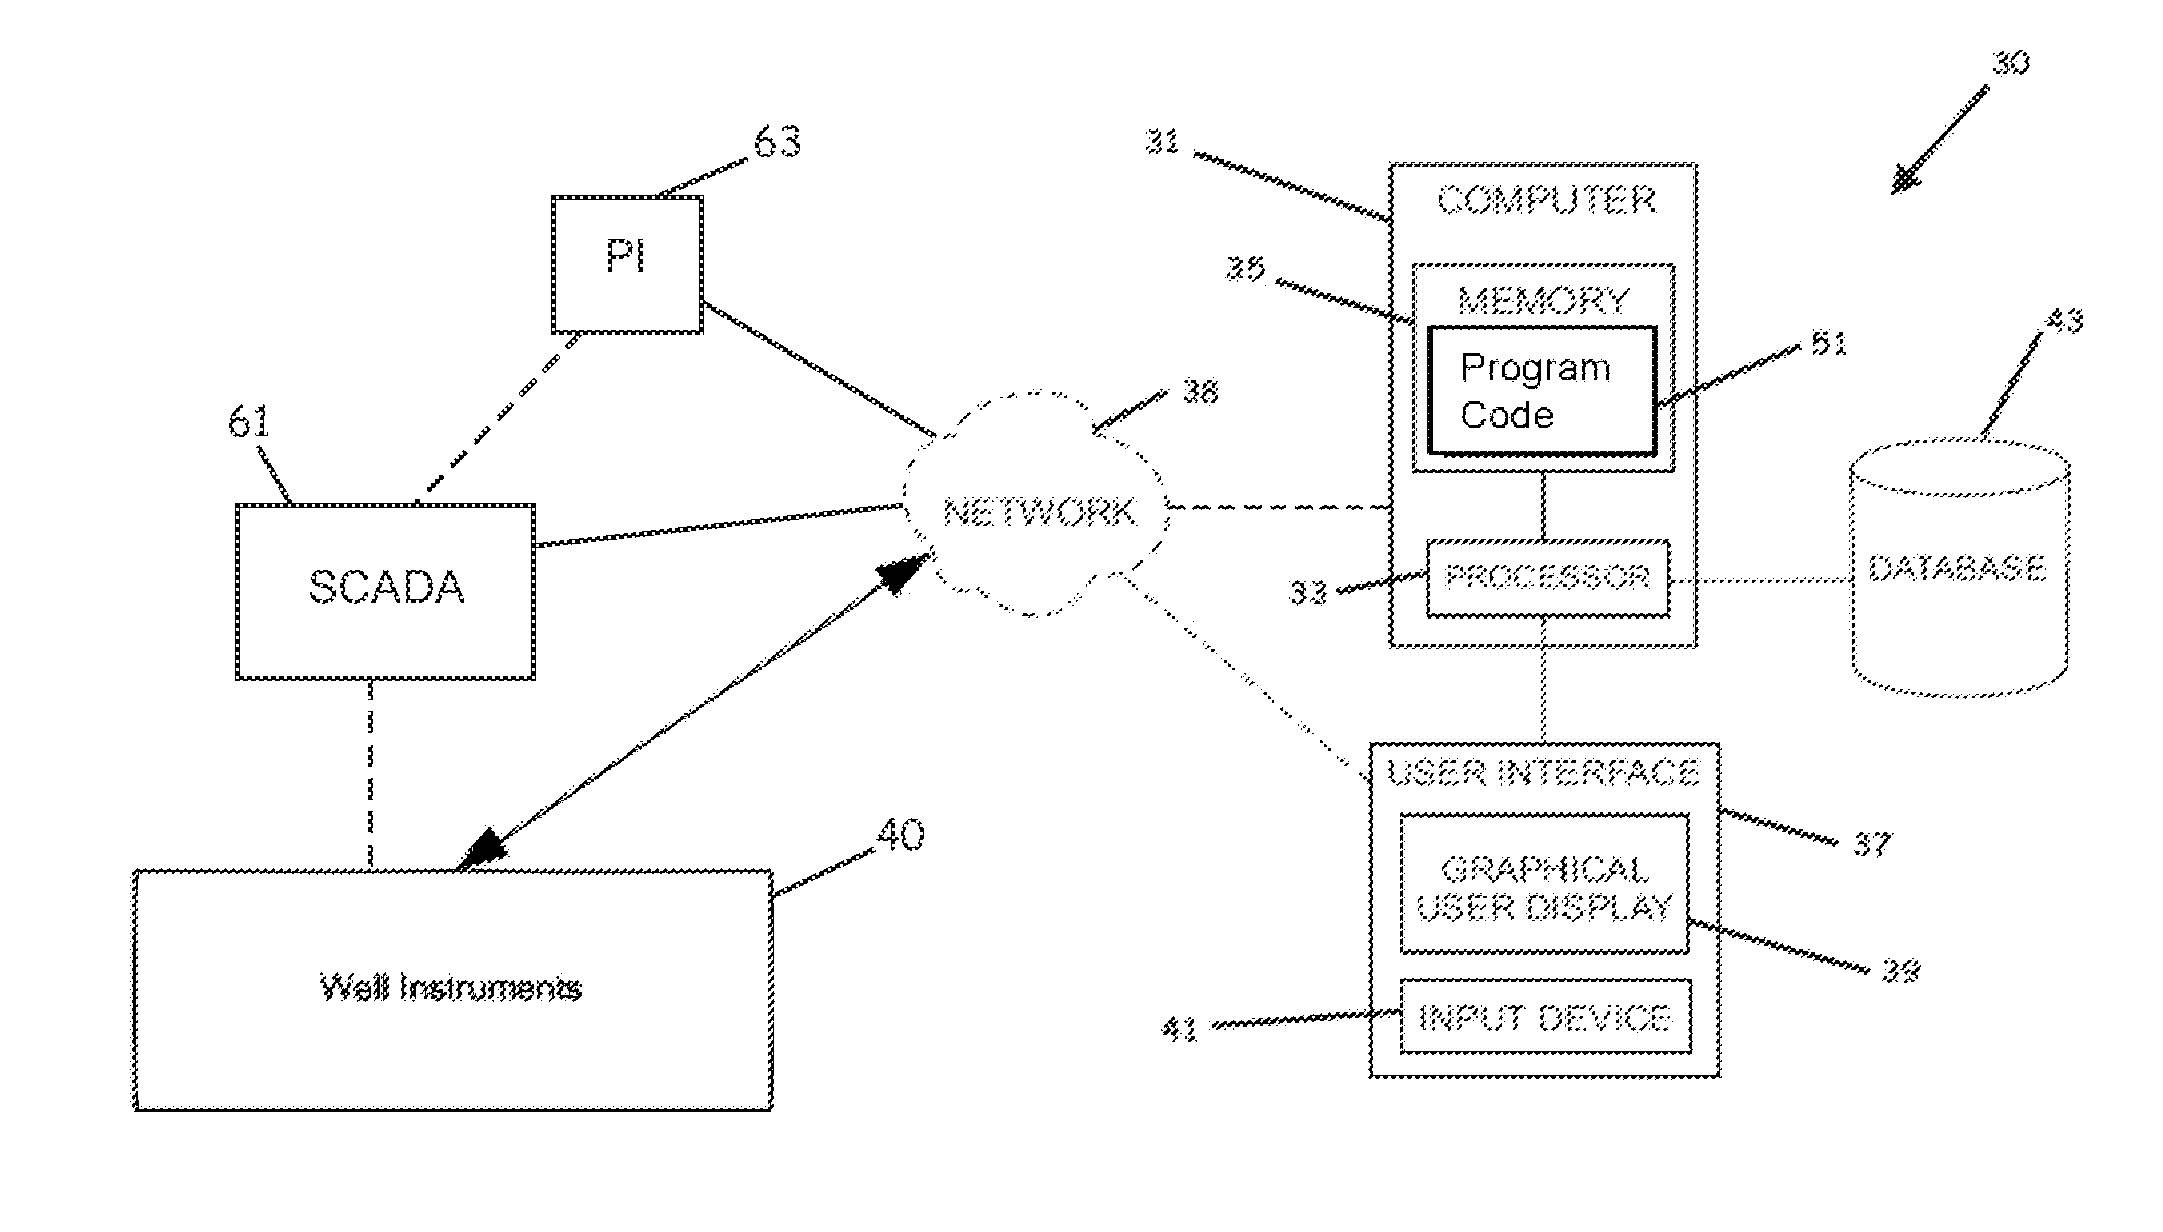 Methods for estimating missing real-time data for intelligent fields